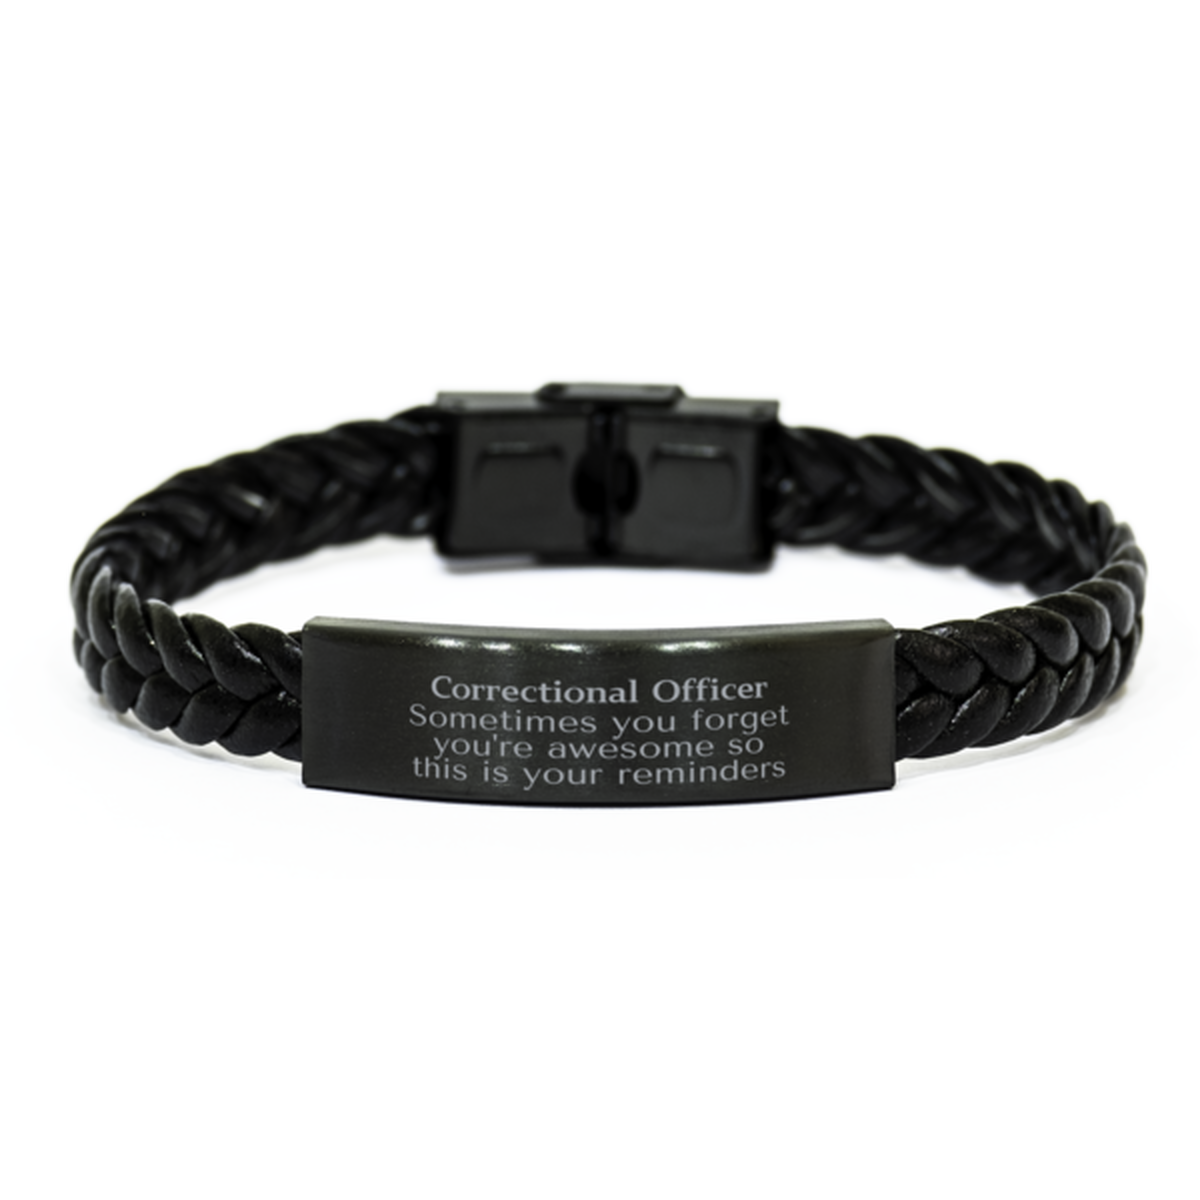 Sentimental Correctional Officer Braided Leather Bracelet, Correctional Officer Sometimes you forget you're awesome so this is your reminders, Graduation Christmas Birthday Gifts for Correctional Officer, Men, Women, Coworkers